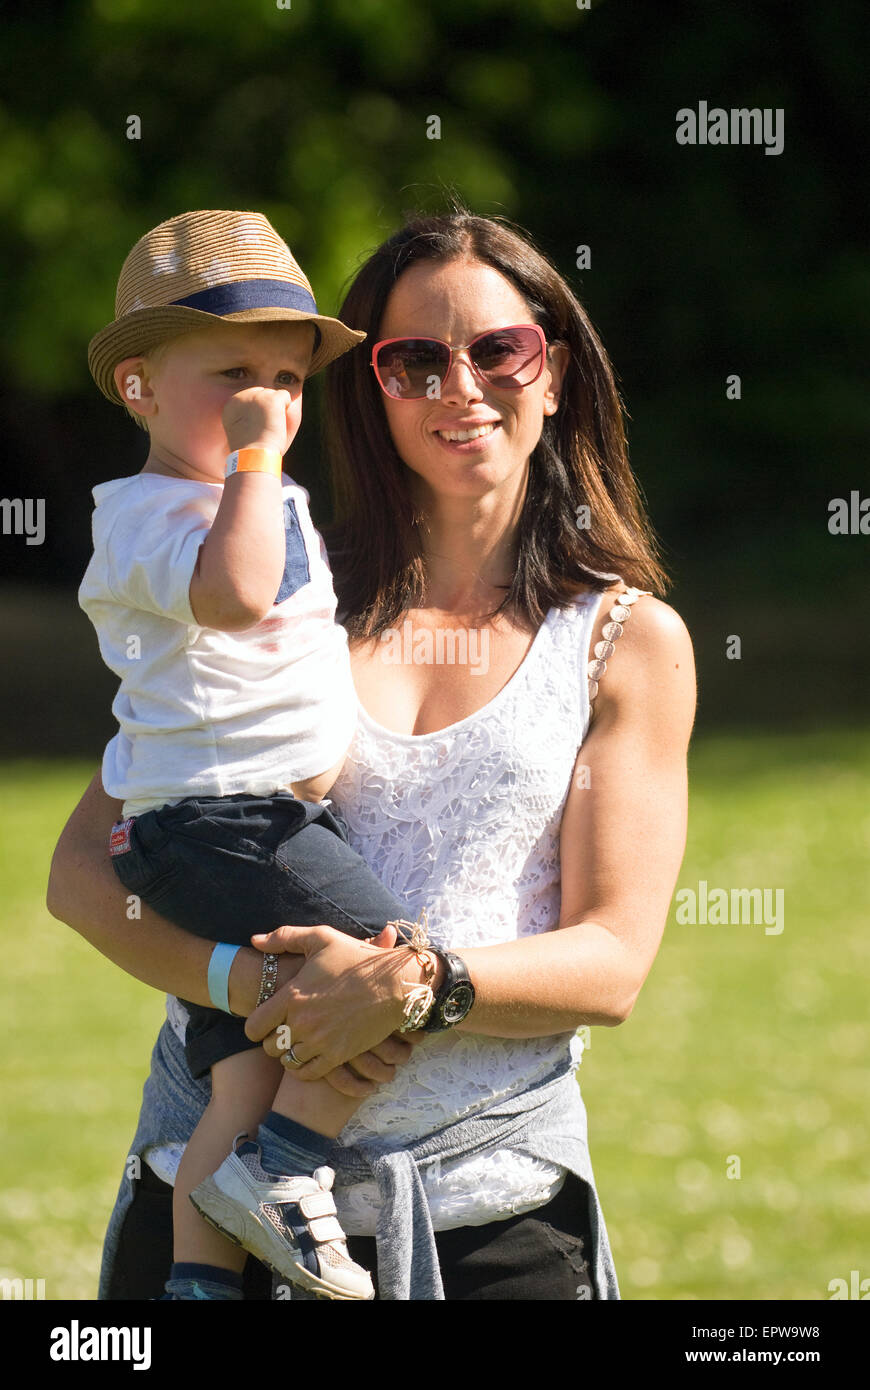 Mother and child enjoying themselves at a local music festival (CHIDDFEST 2015), Chiddingfold, Godalming, Surrey, UK. Stock Photo